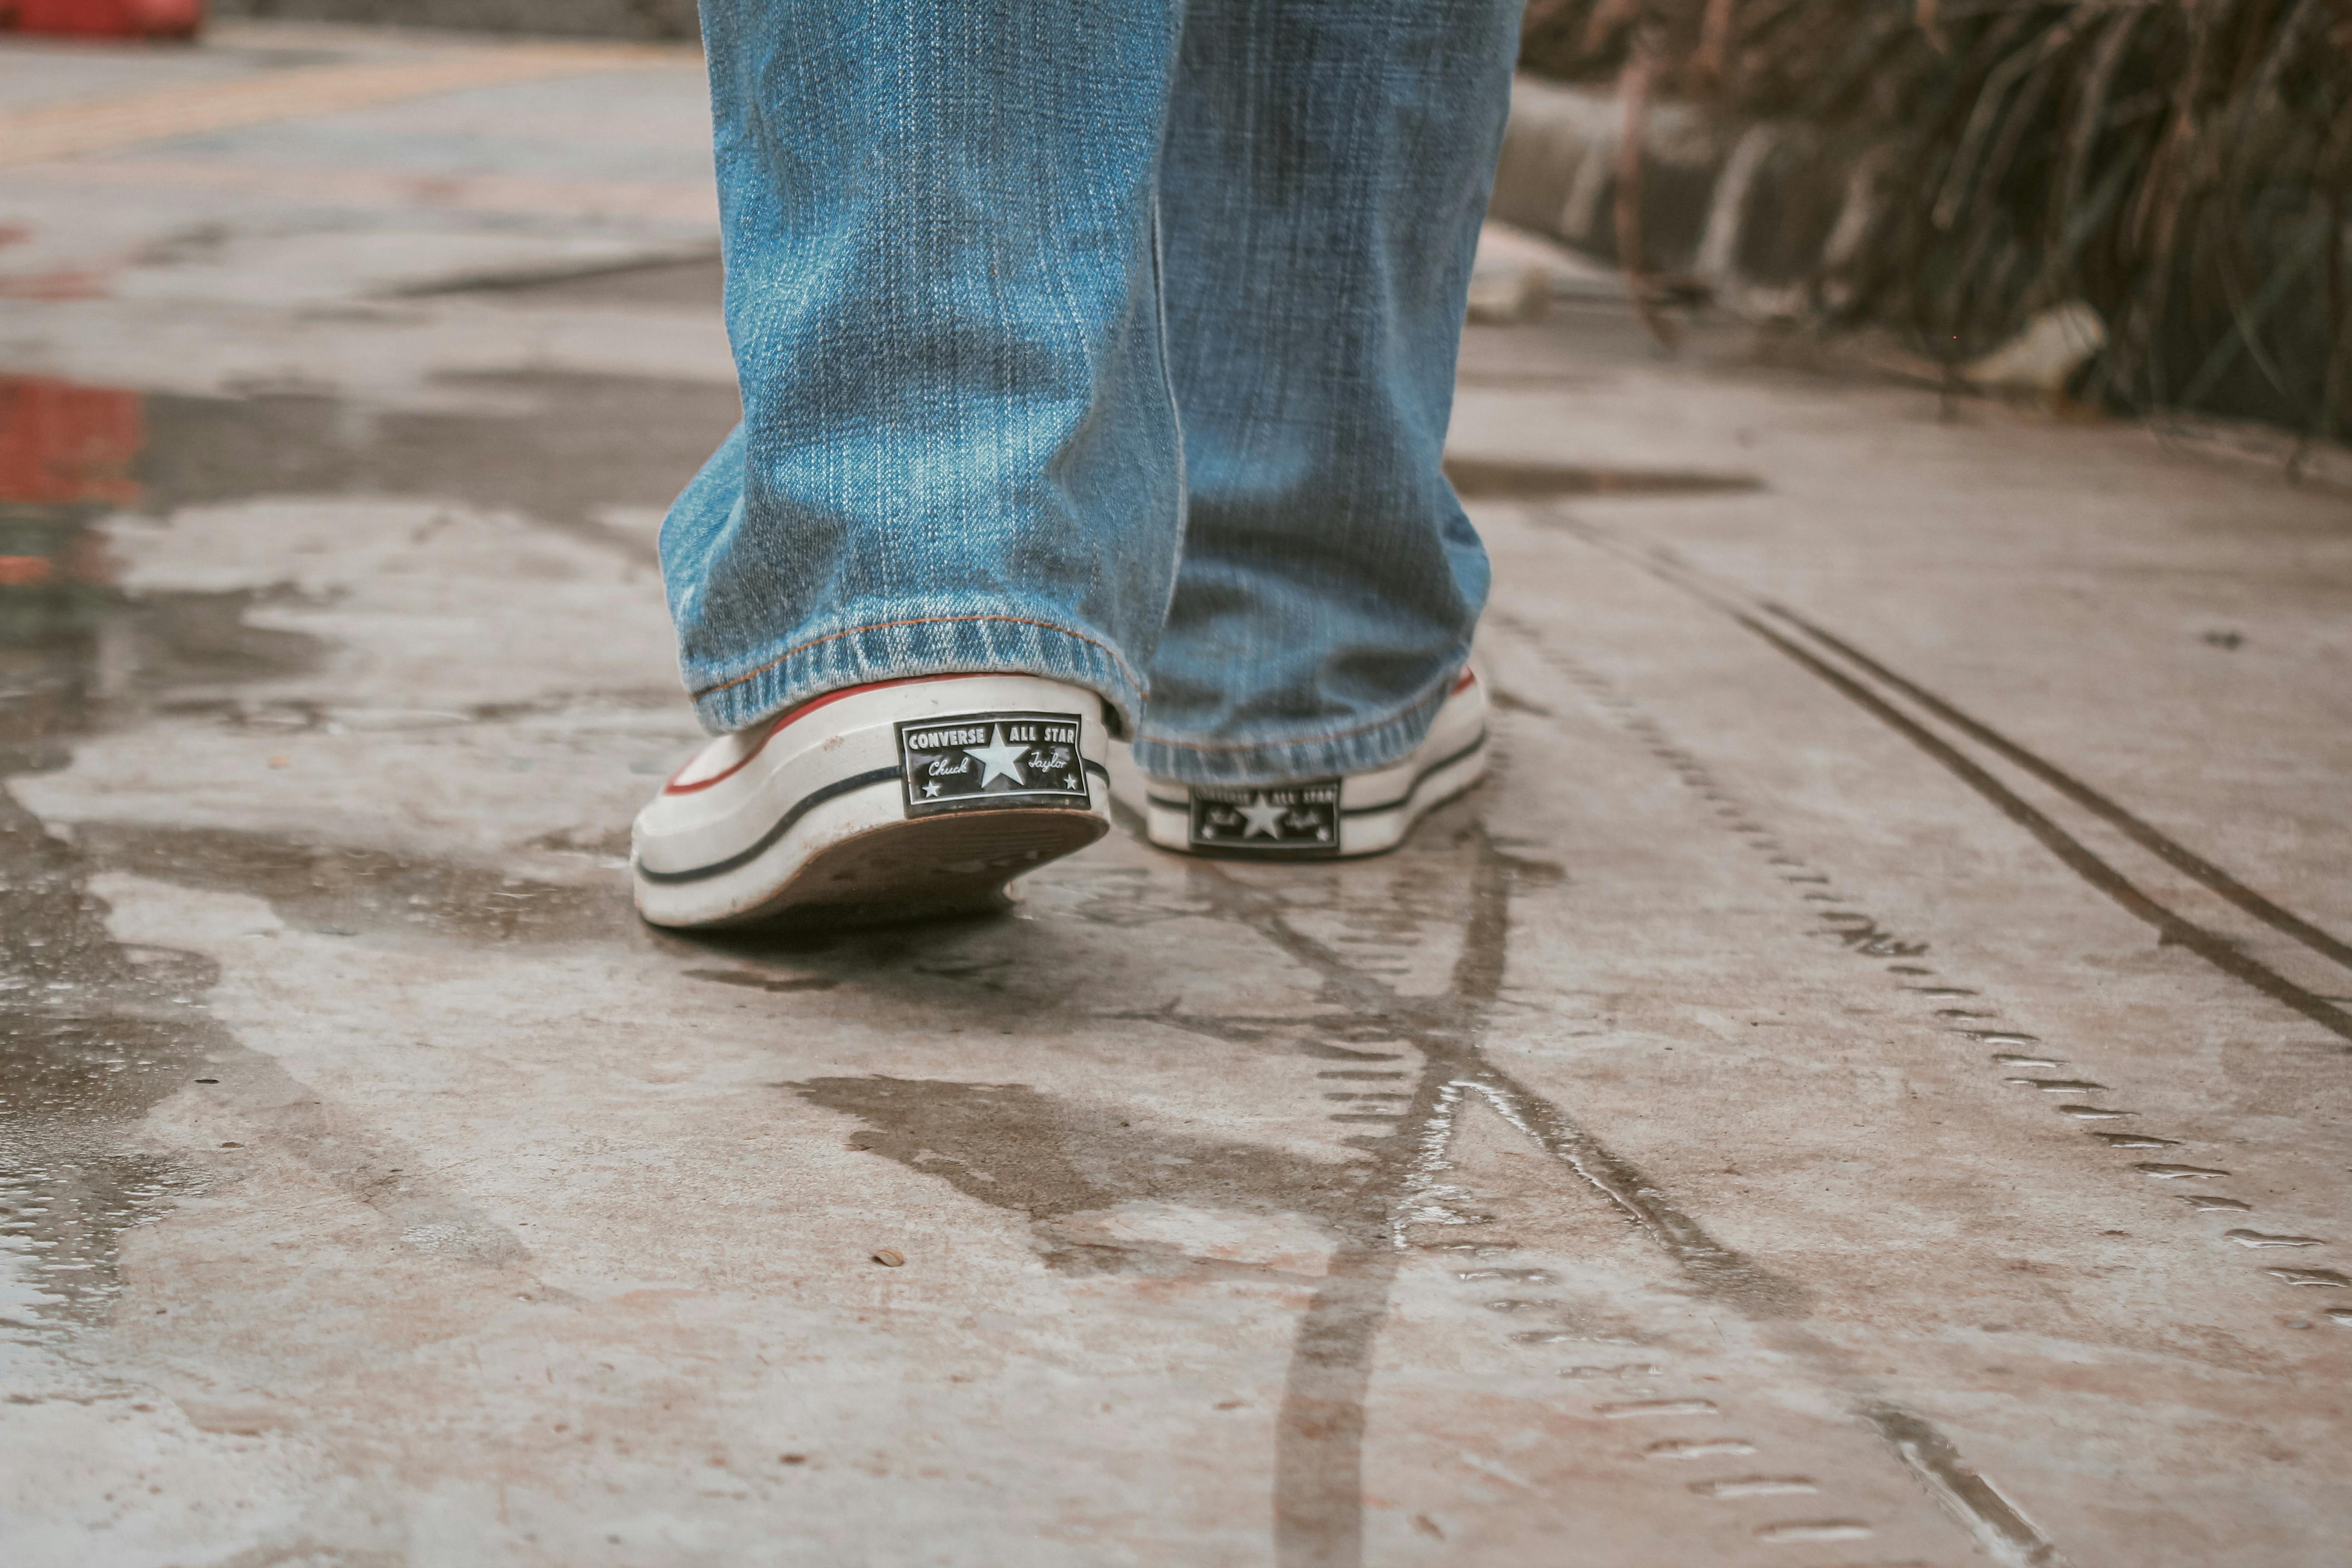 Mexico meat Literacy Person Wearing Orange Converse All Star High Top Sneakers · Free Stock Photo